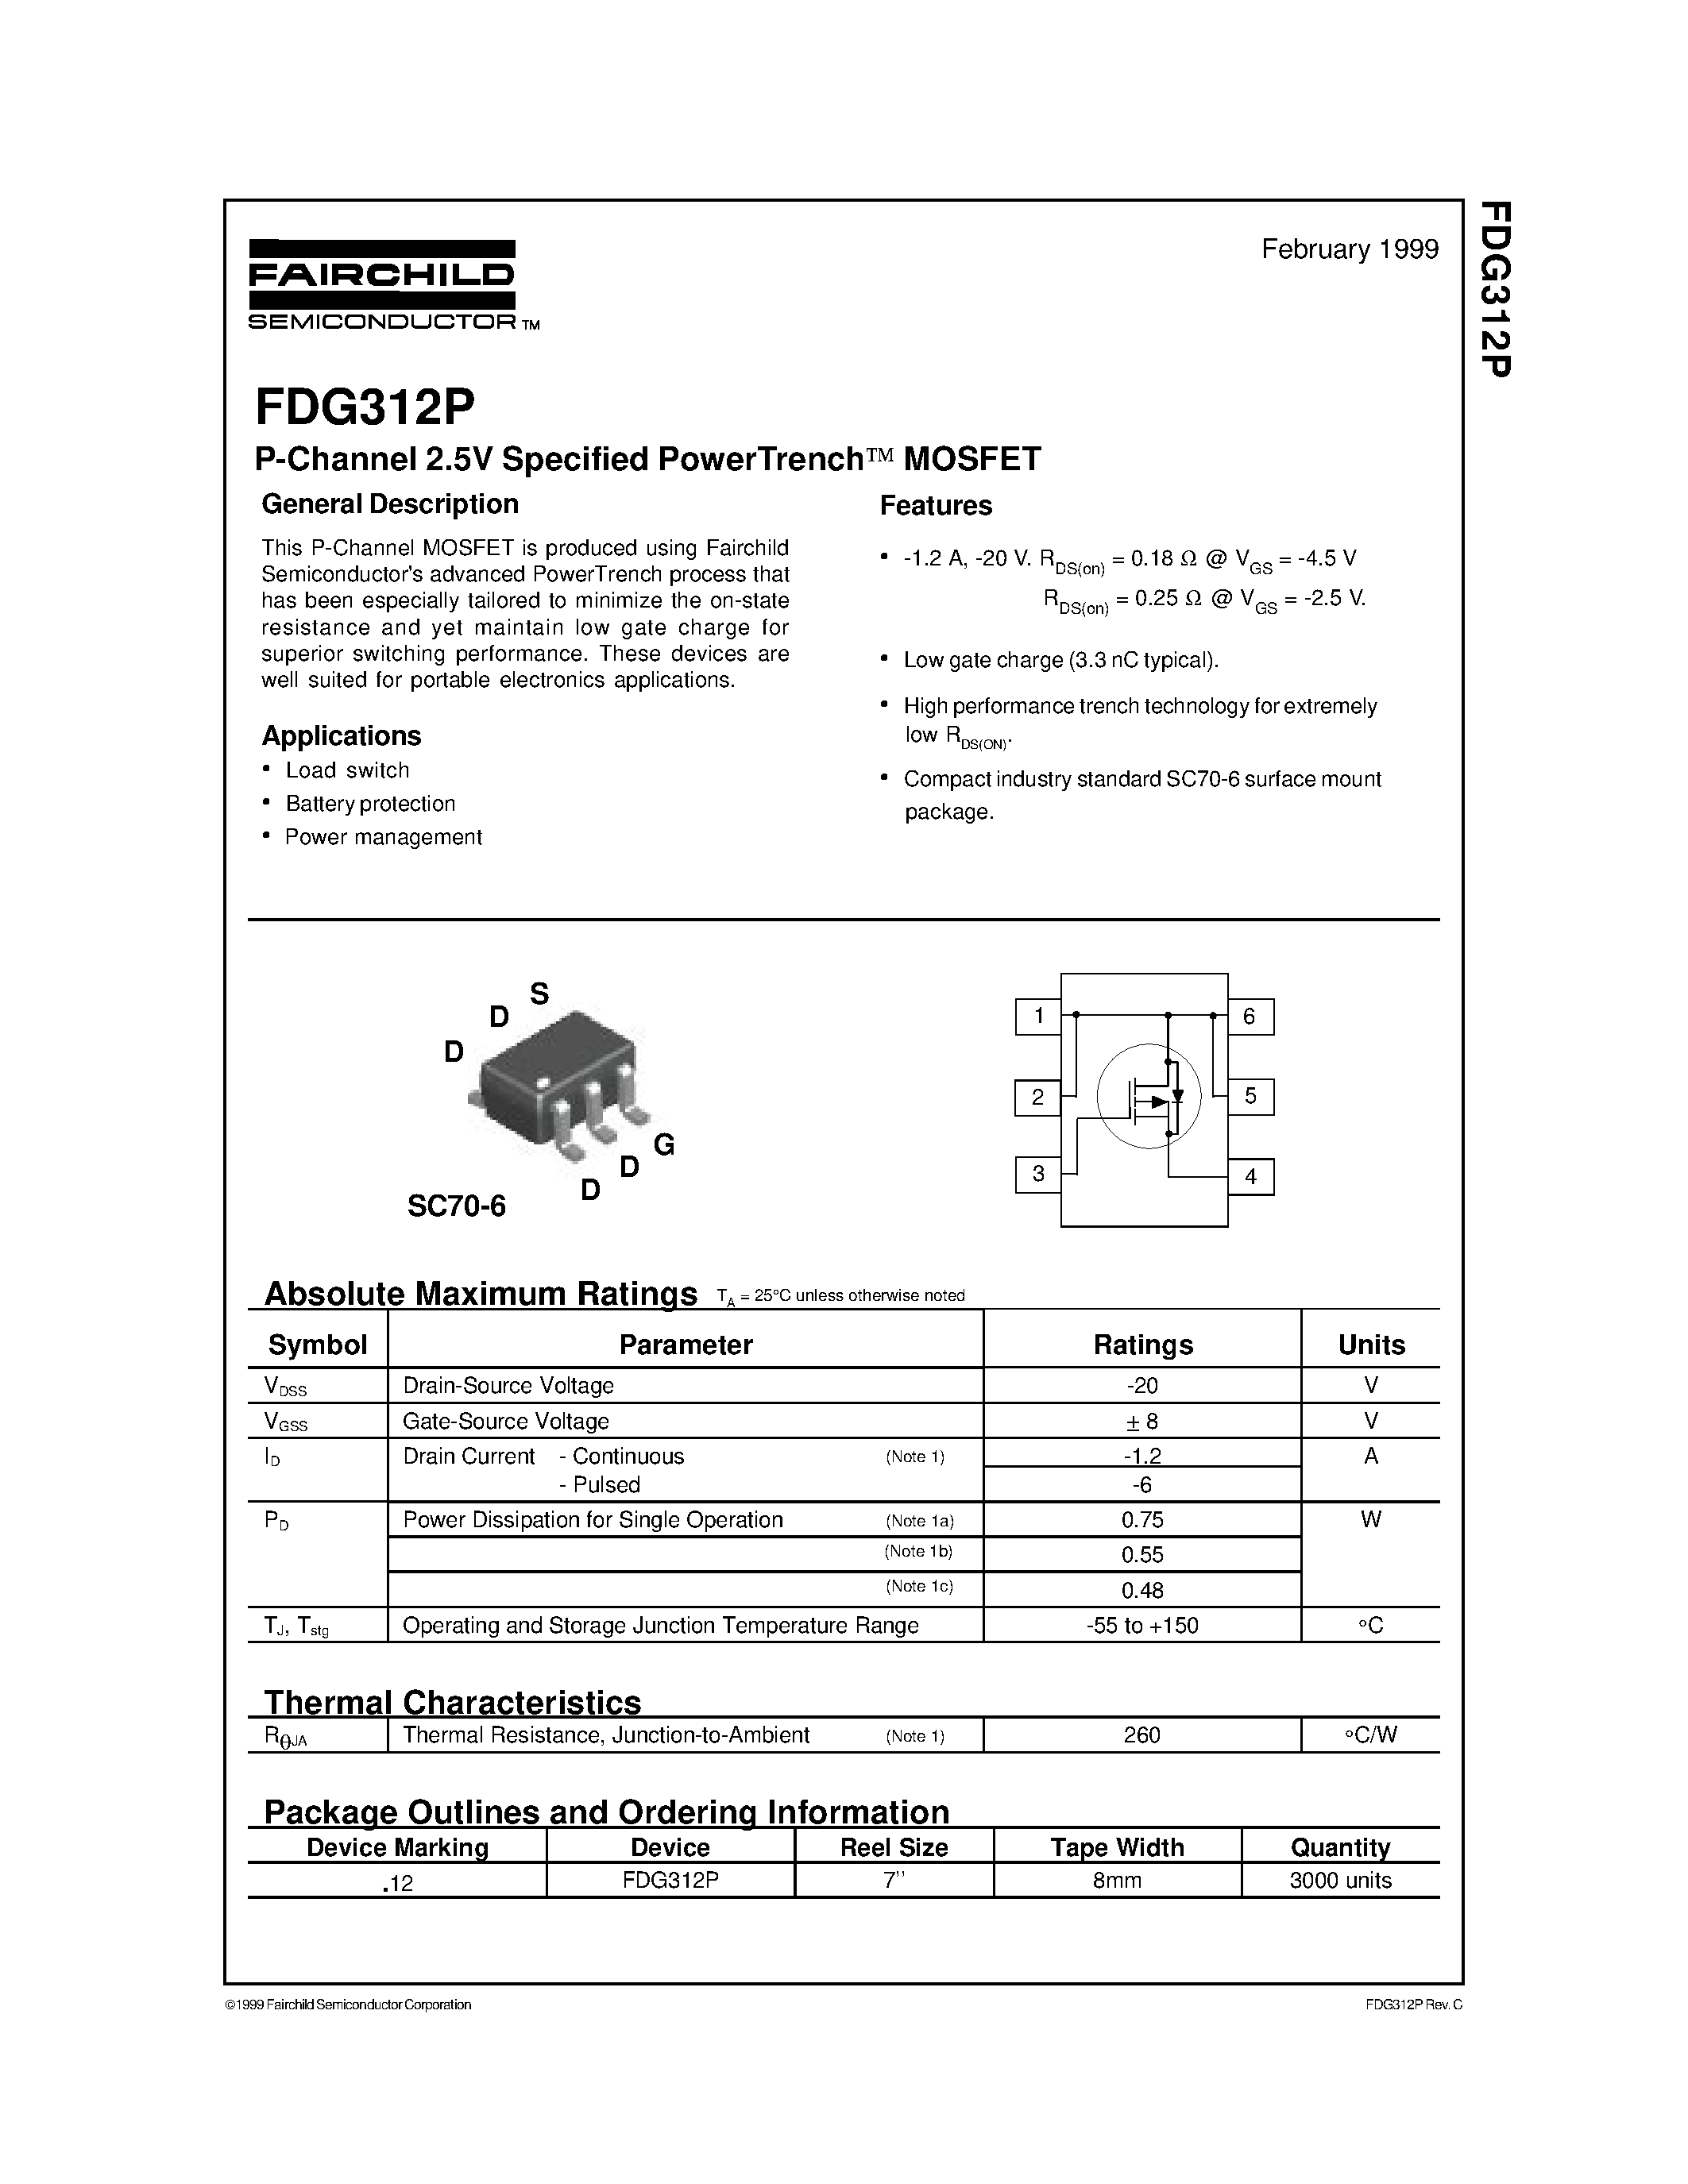 Даташит FDG312P - P-Channel 2.5V Specified PowerTrench MOSFET страница 1